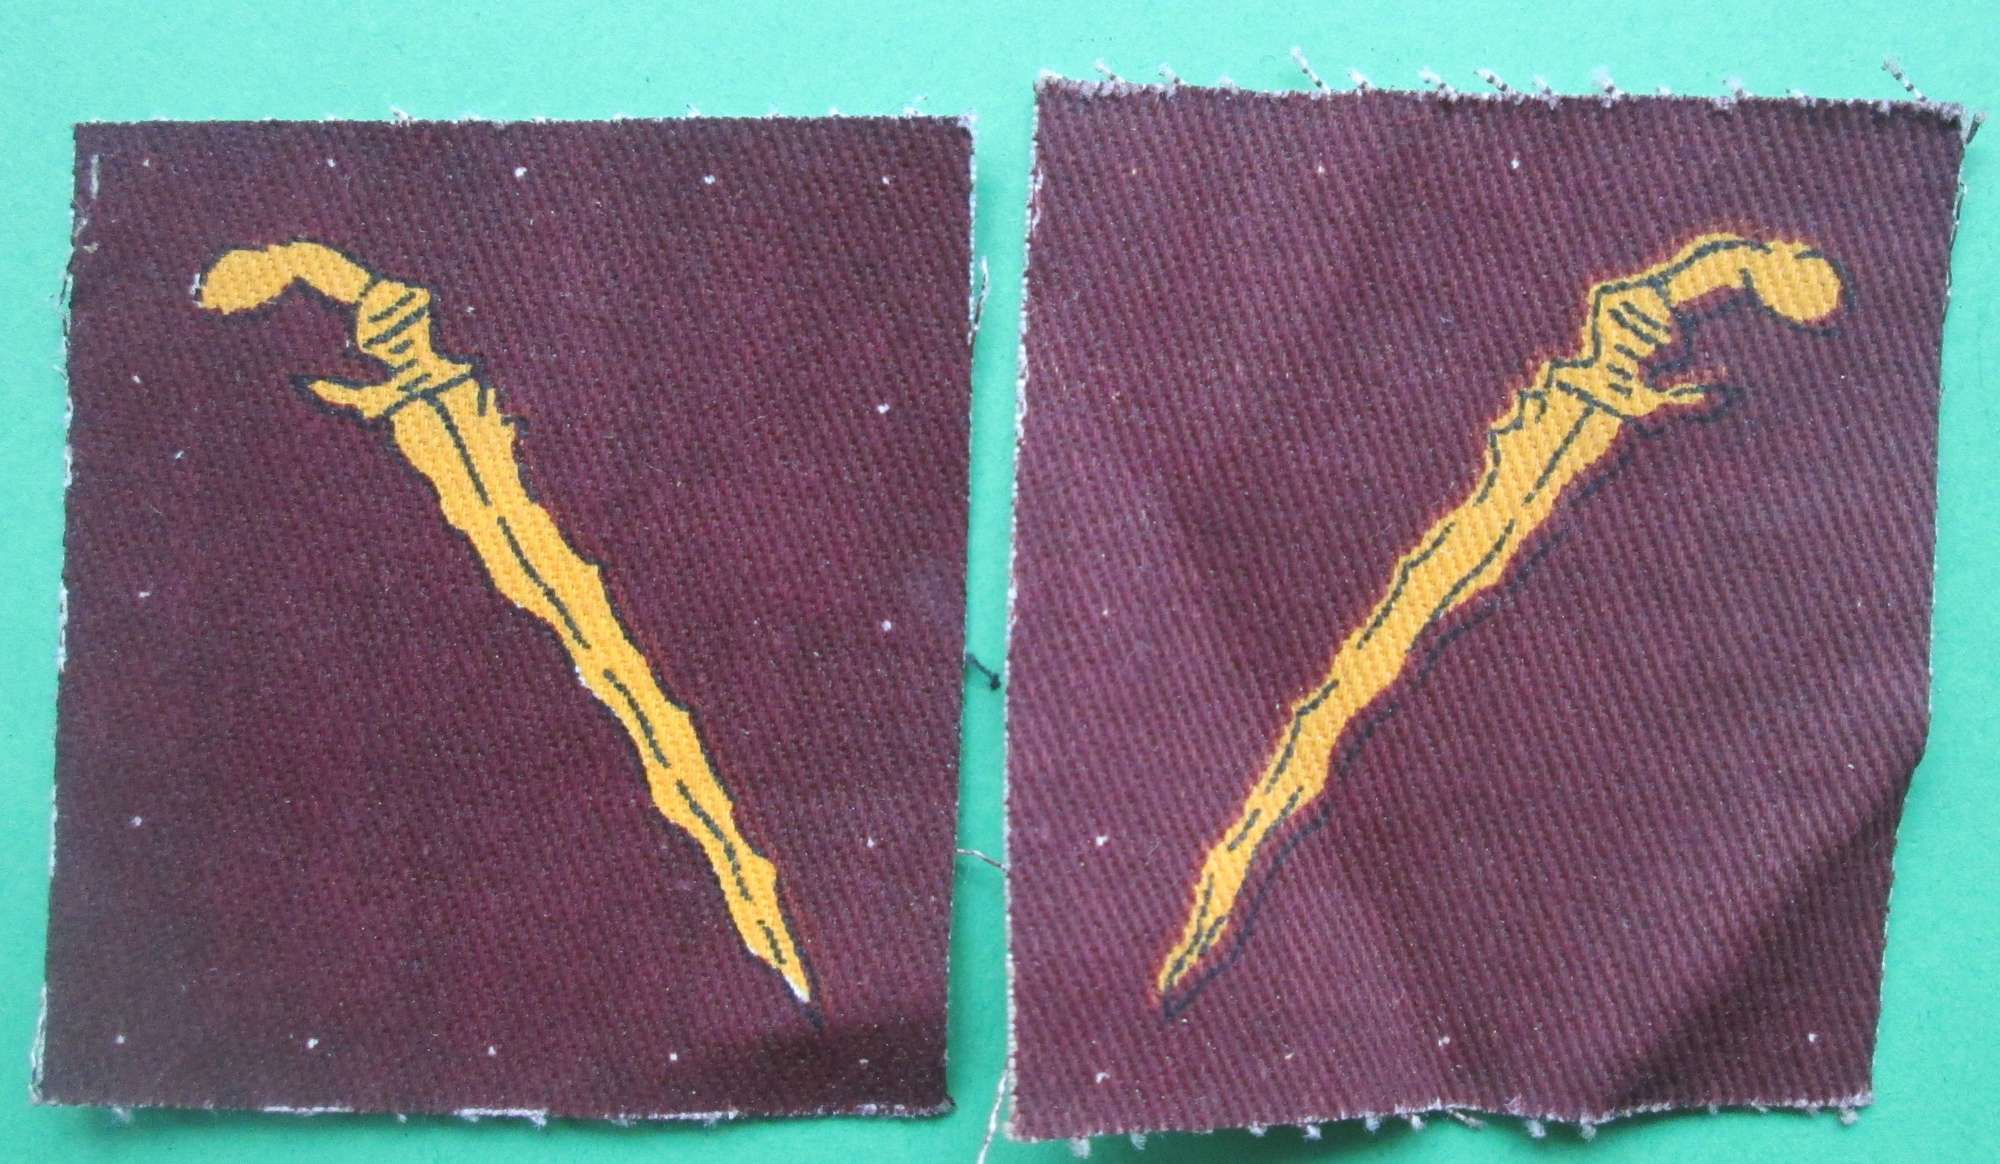 A MINT FACING PAIR OF THE MALAYA COMMAND FORMATION PATCHES